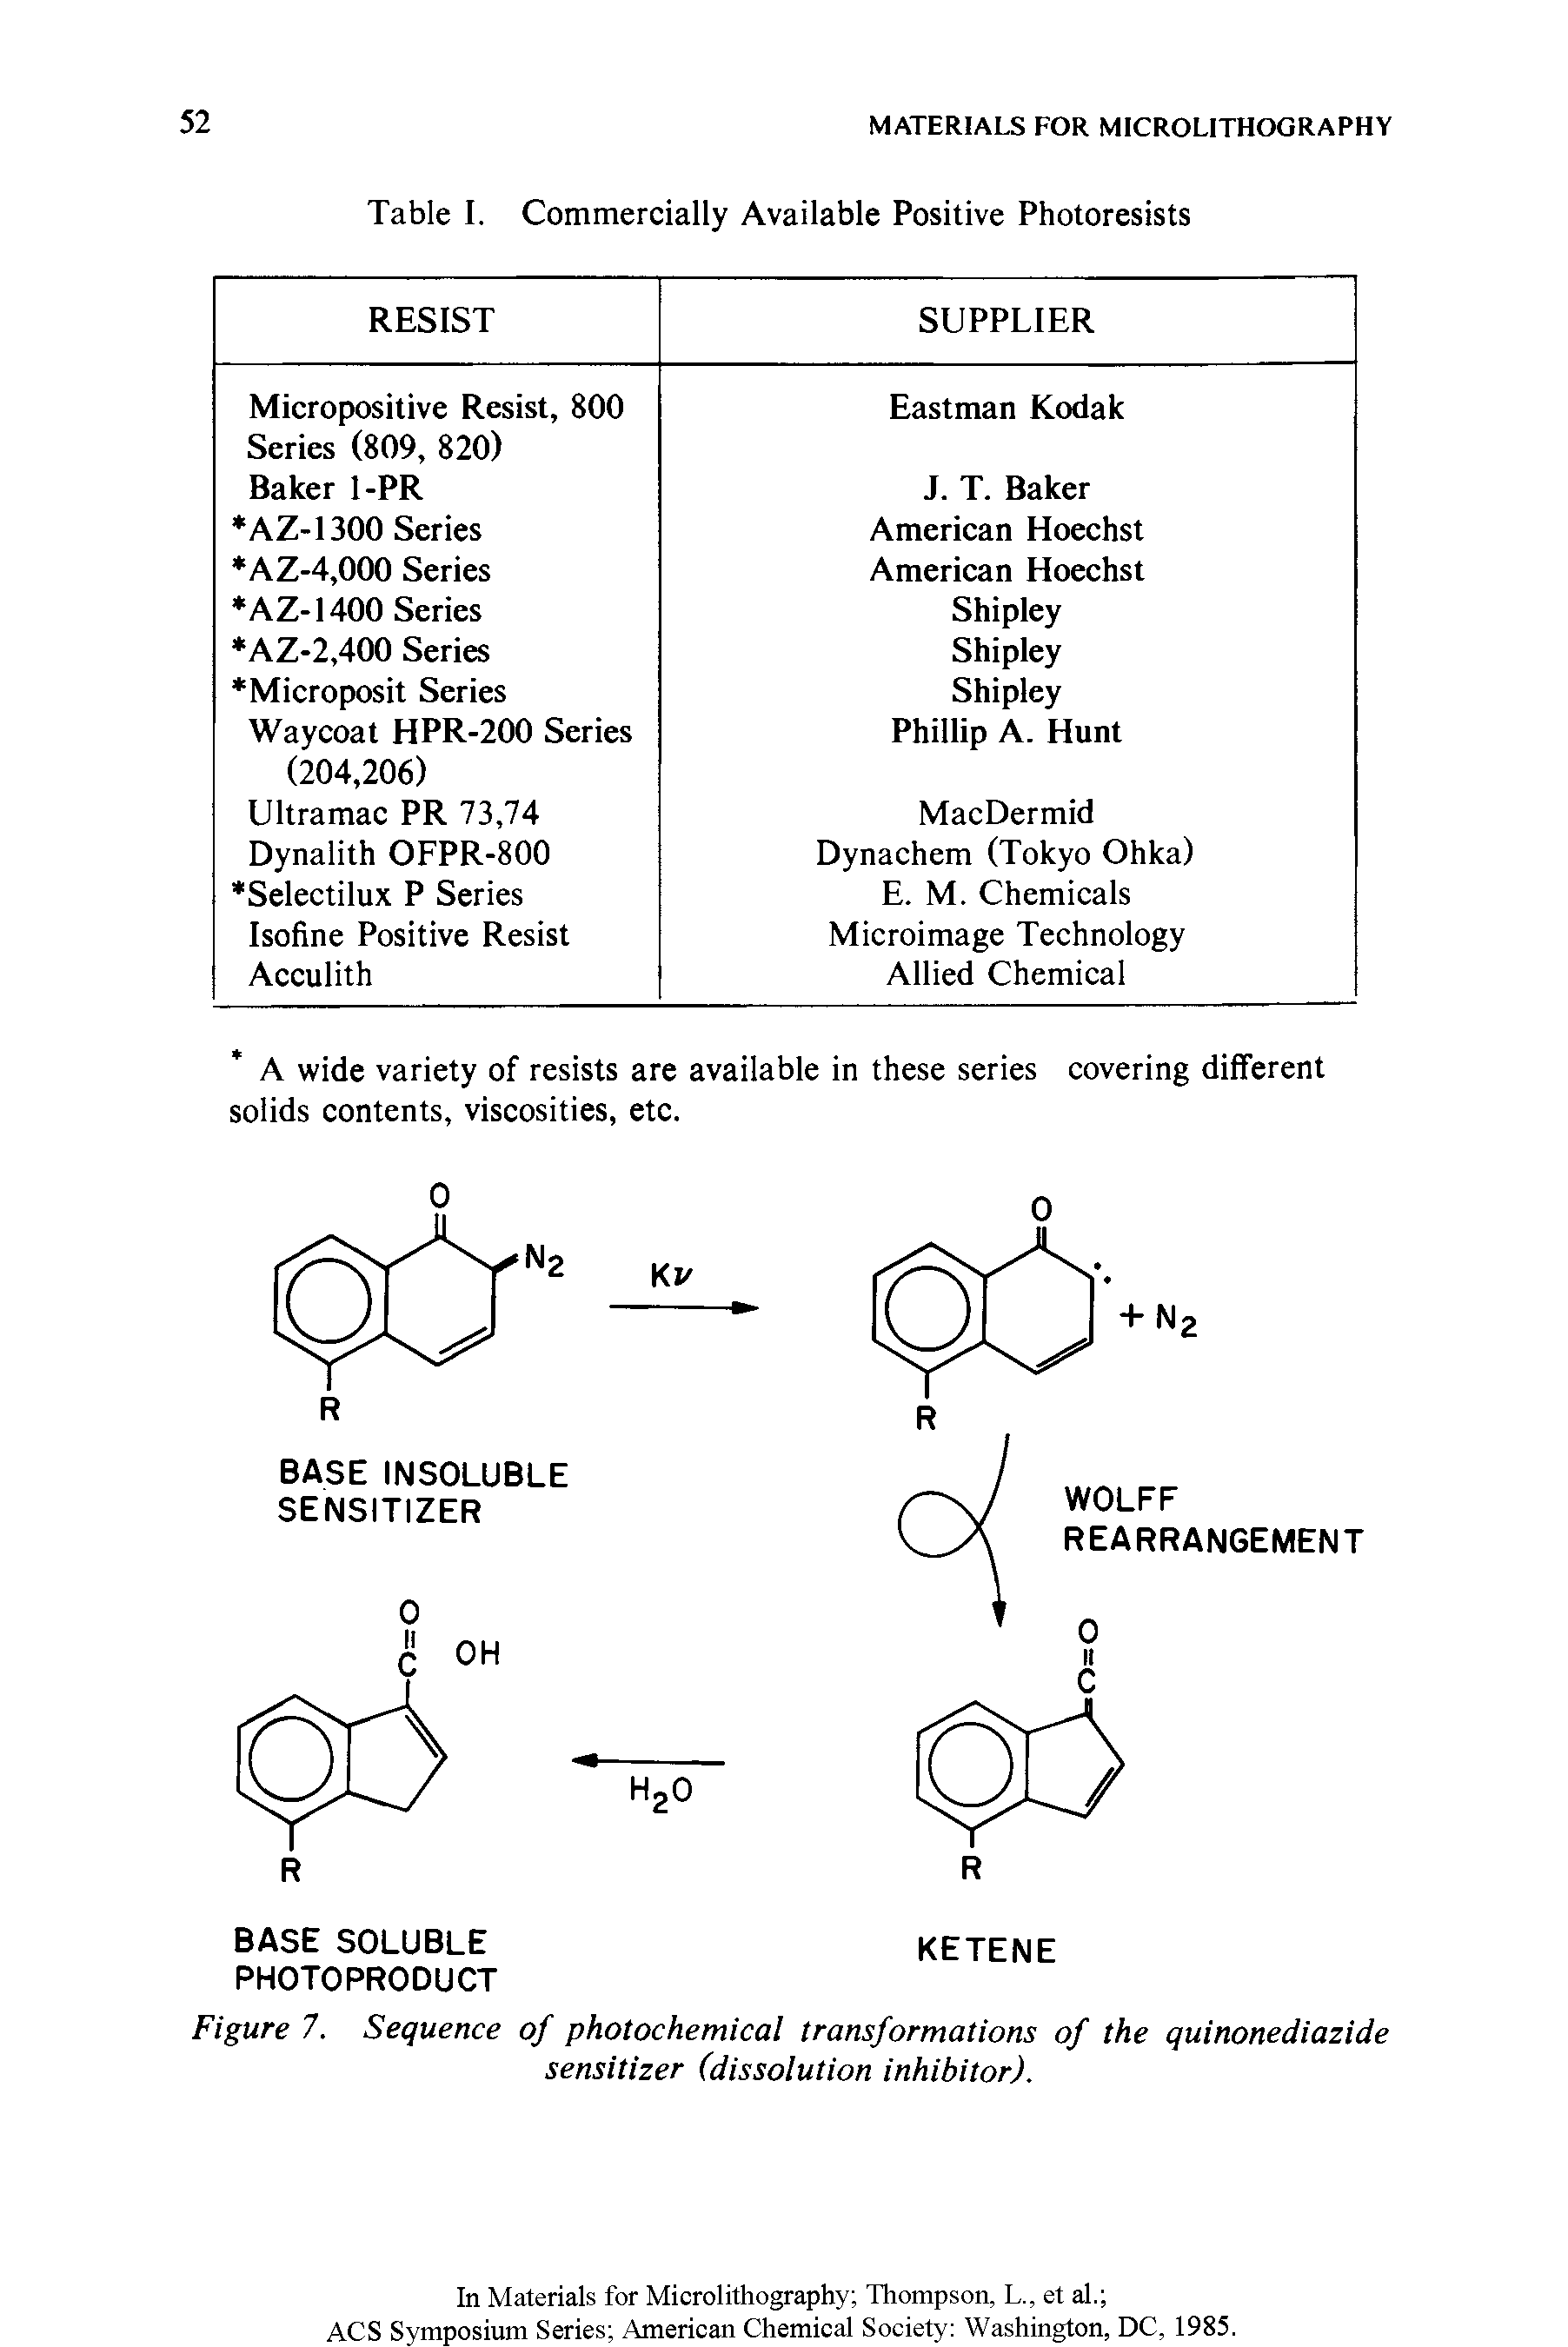 Figure 7. Sequence of photochemical transformations of the quinonediazide sensitizer (dissolution inhibitor).